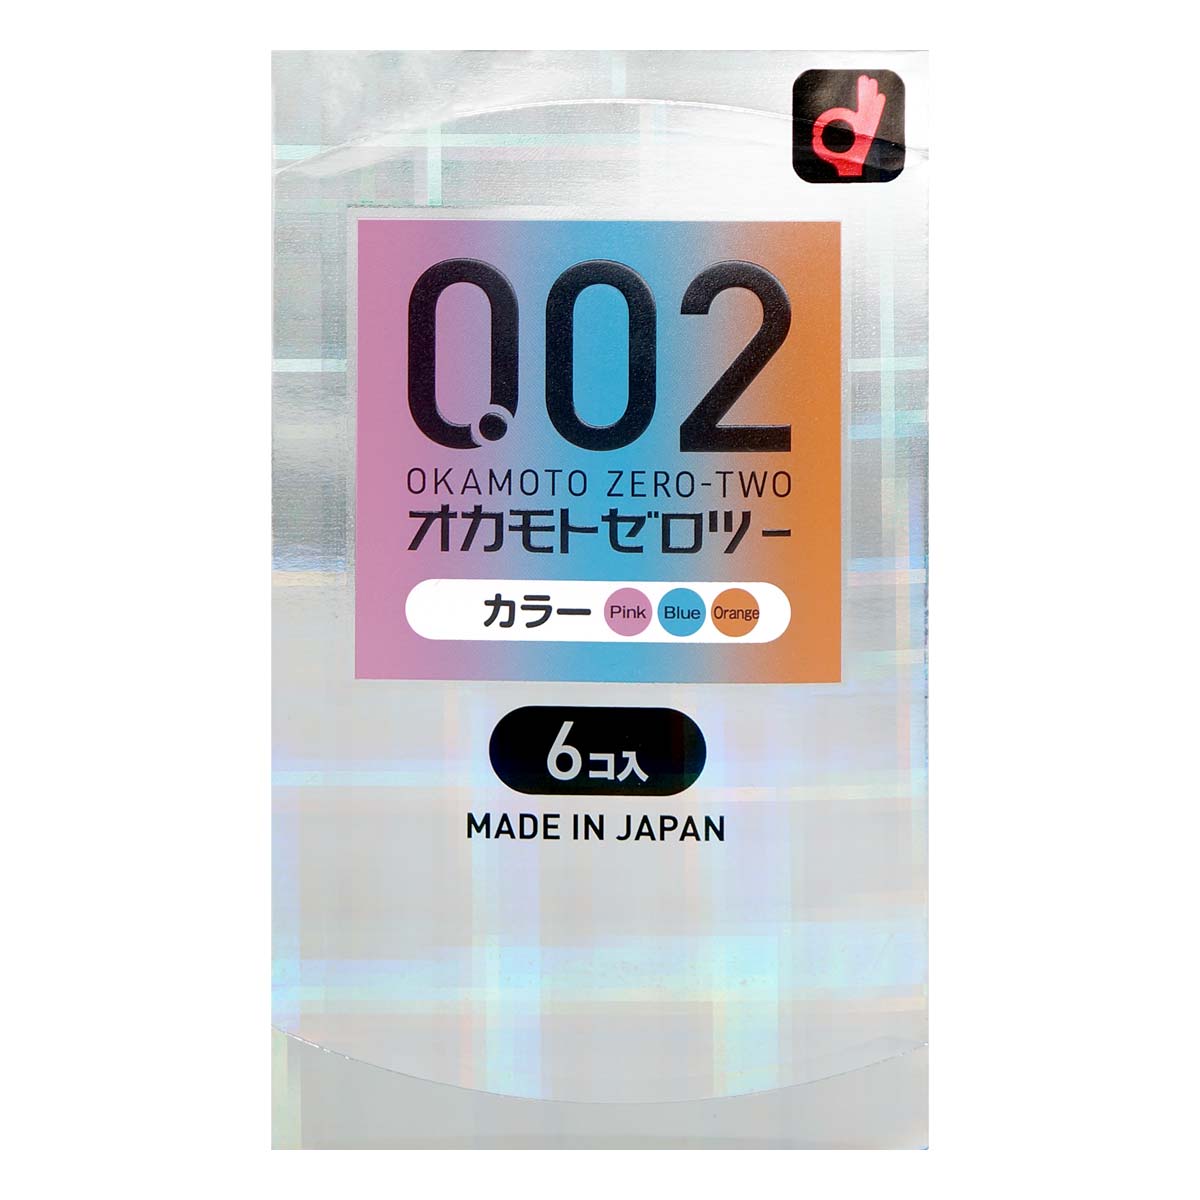 Okamoto Unified Thinness 0.02 3-colors (Japan Edition) 6's Pack PU Condom-p_2